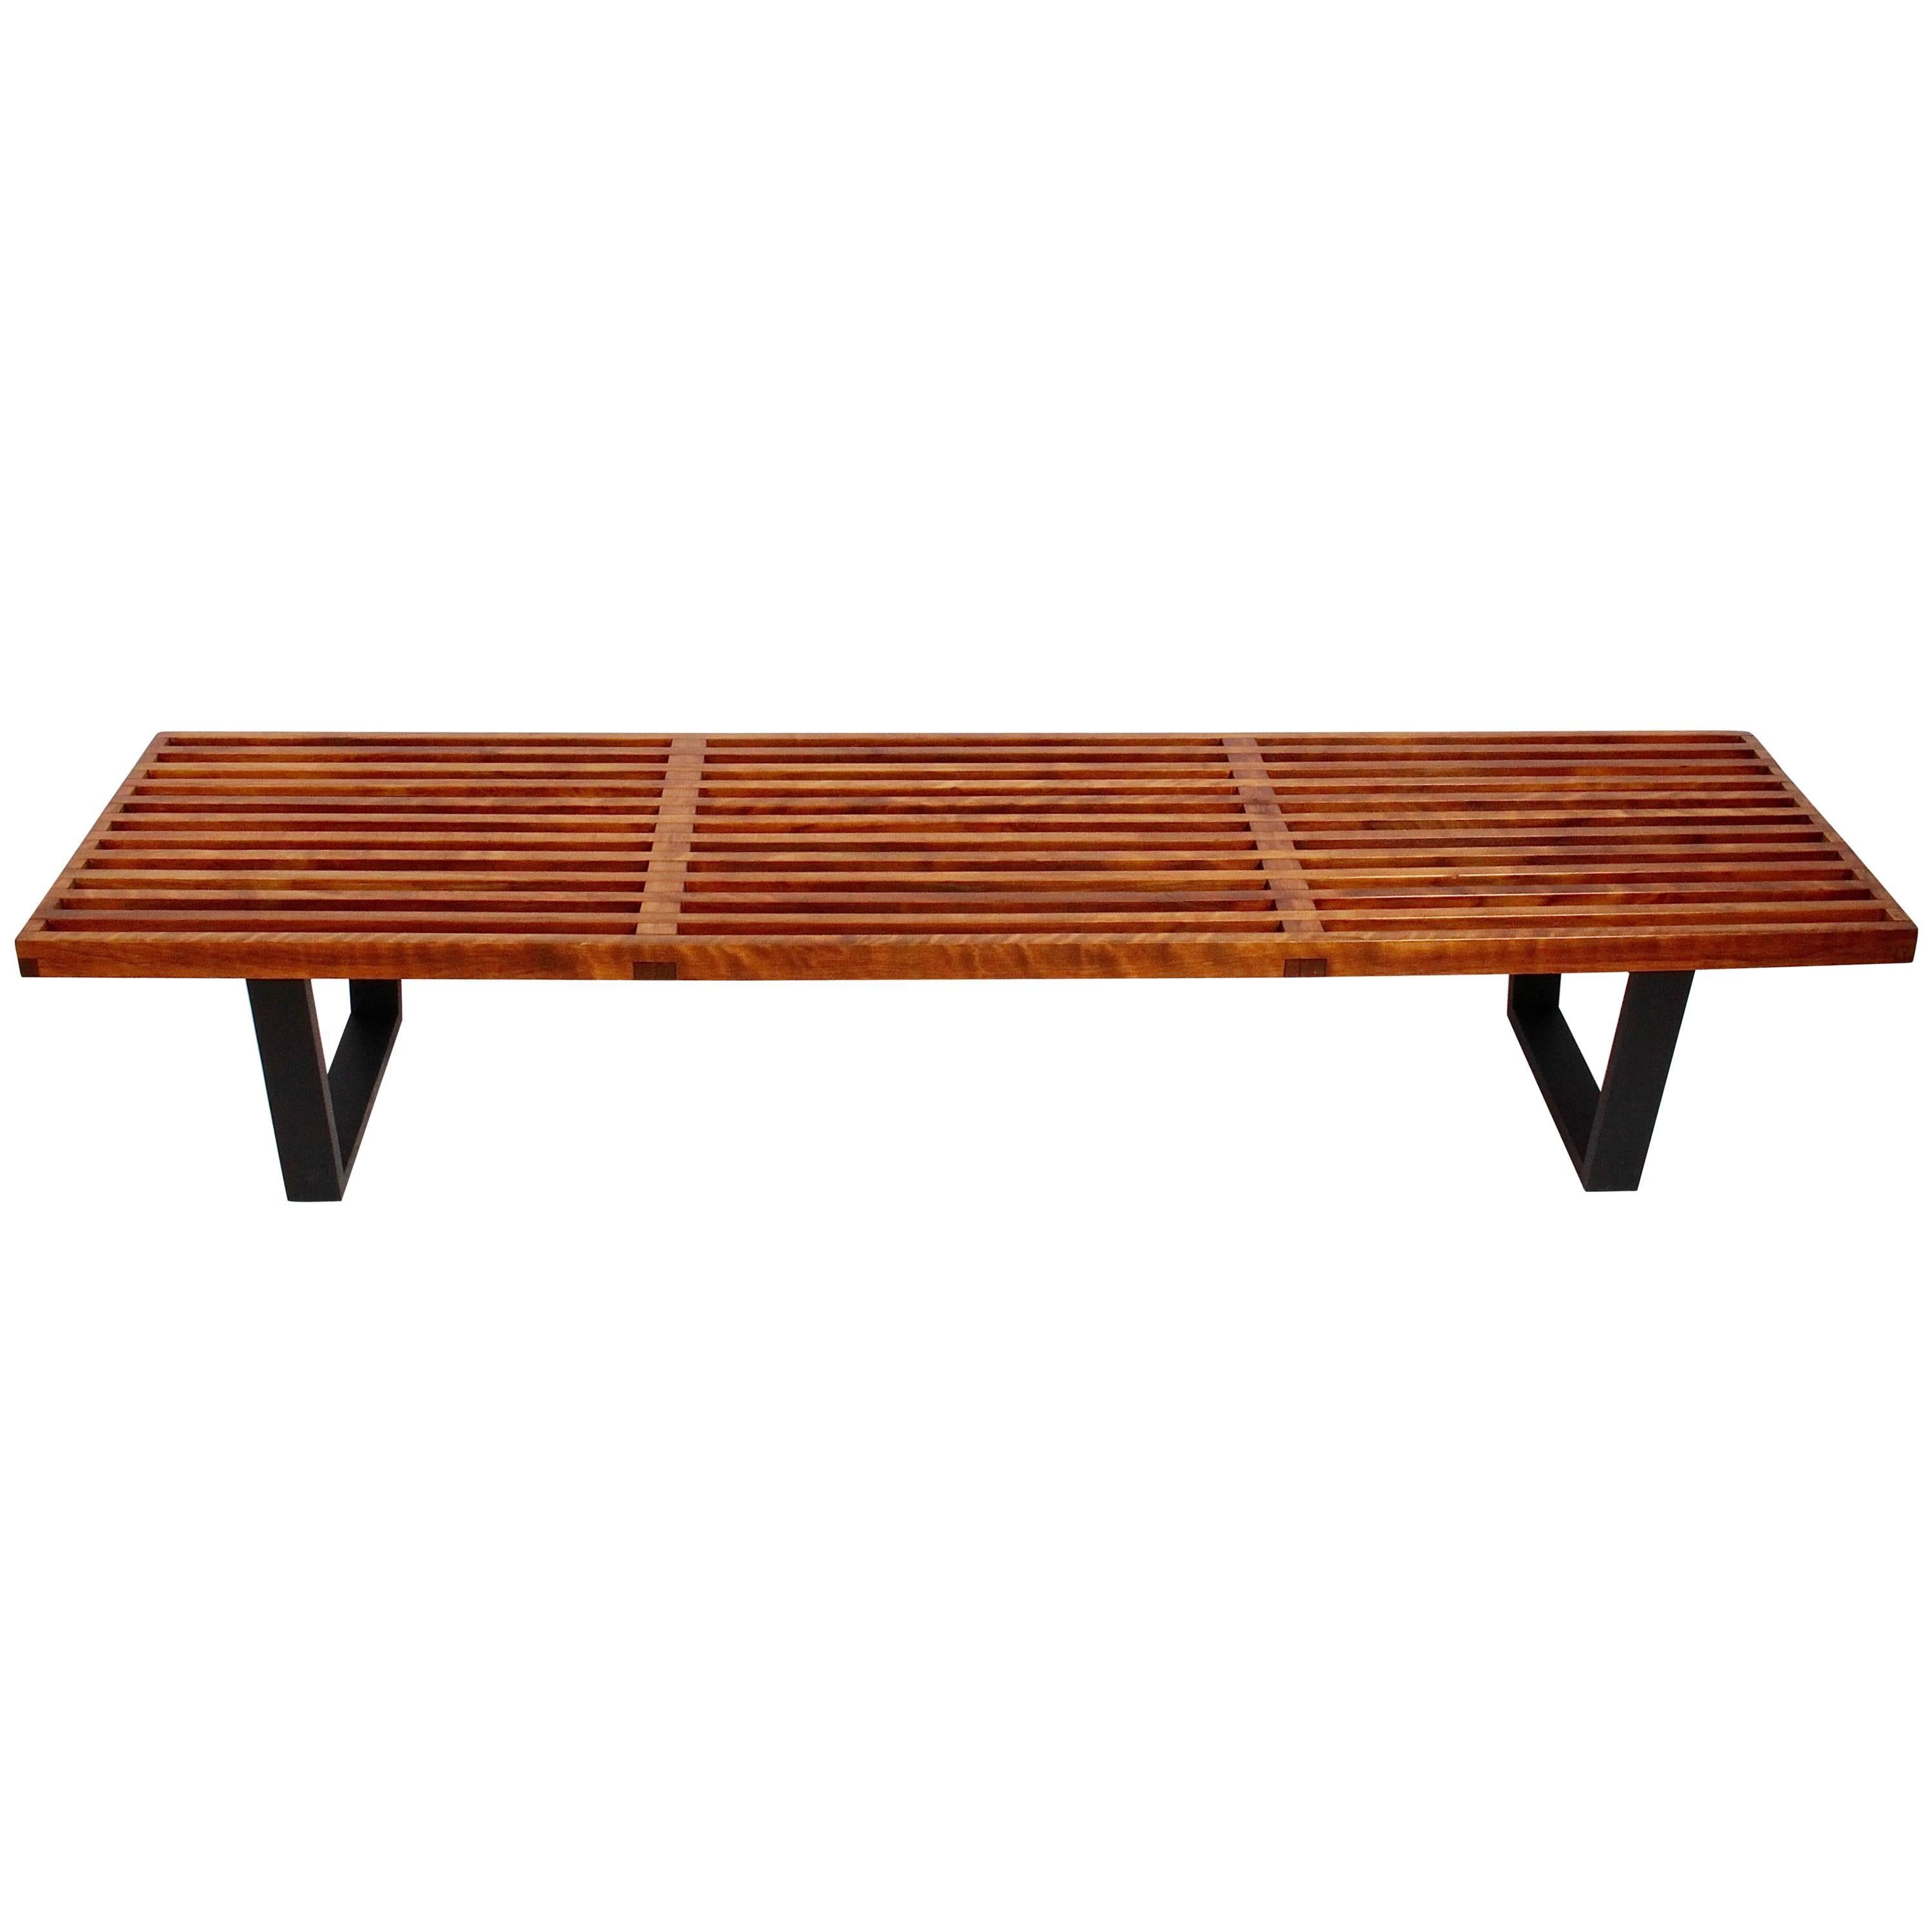 George Nelson for Herman Miller Maple Six Foot Bench, Coffee Table, Circa 1960s